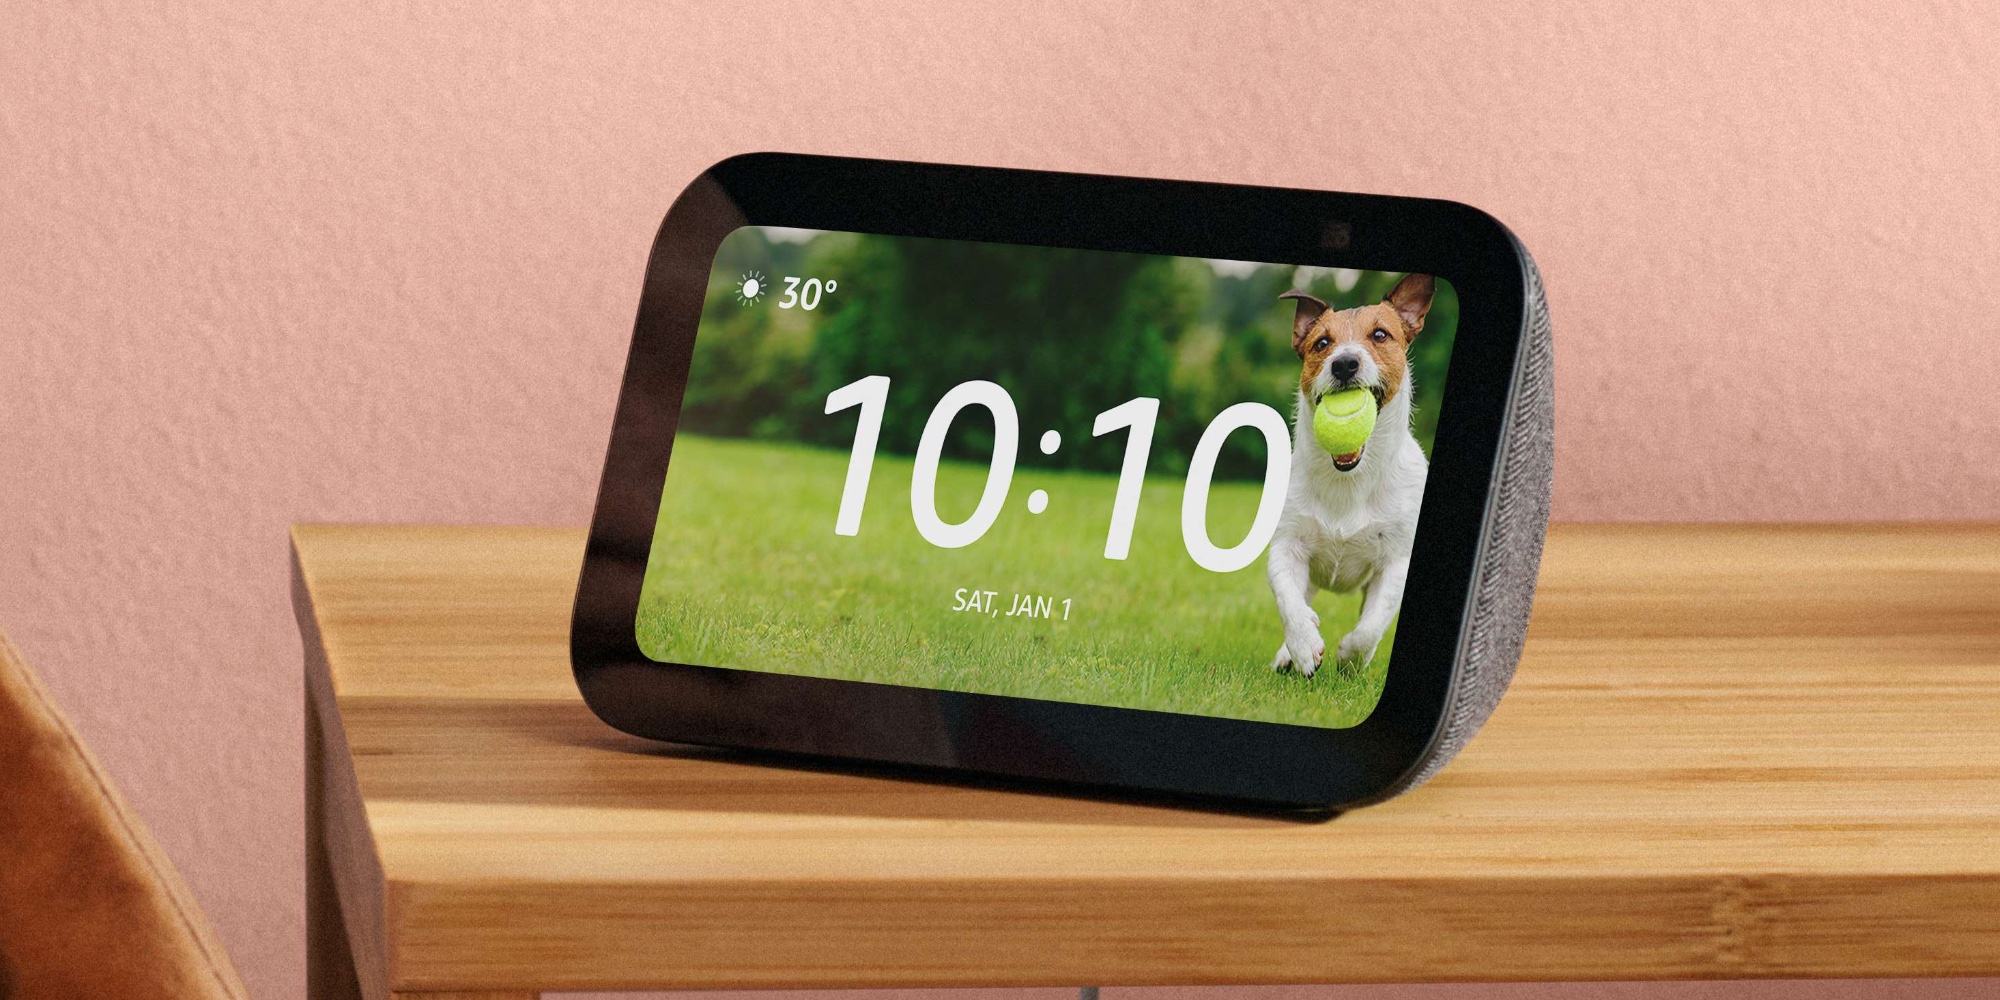 Echo Show 5 review: This new 5-inch Alexa display costs